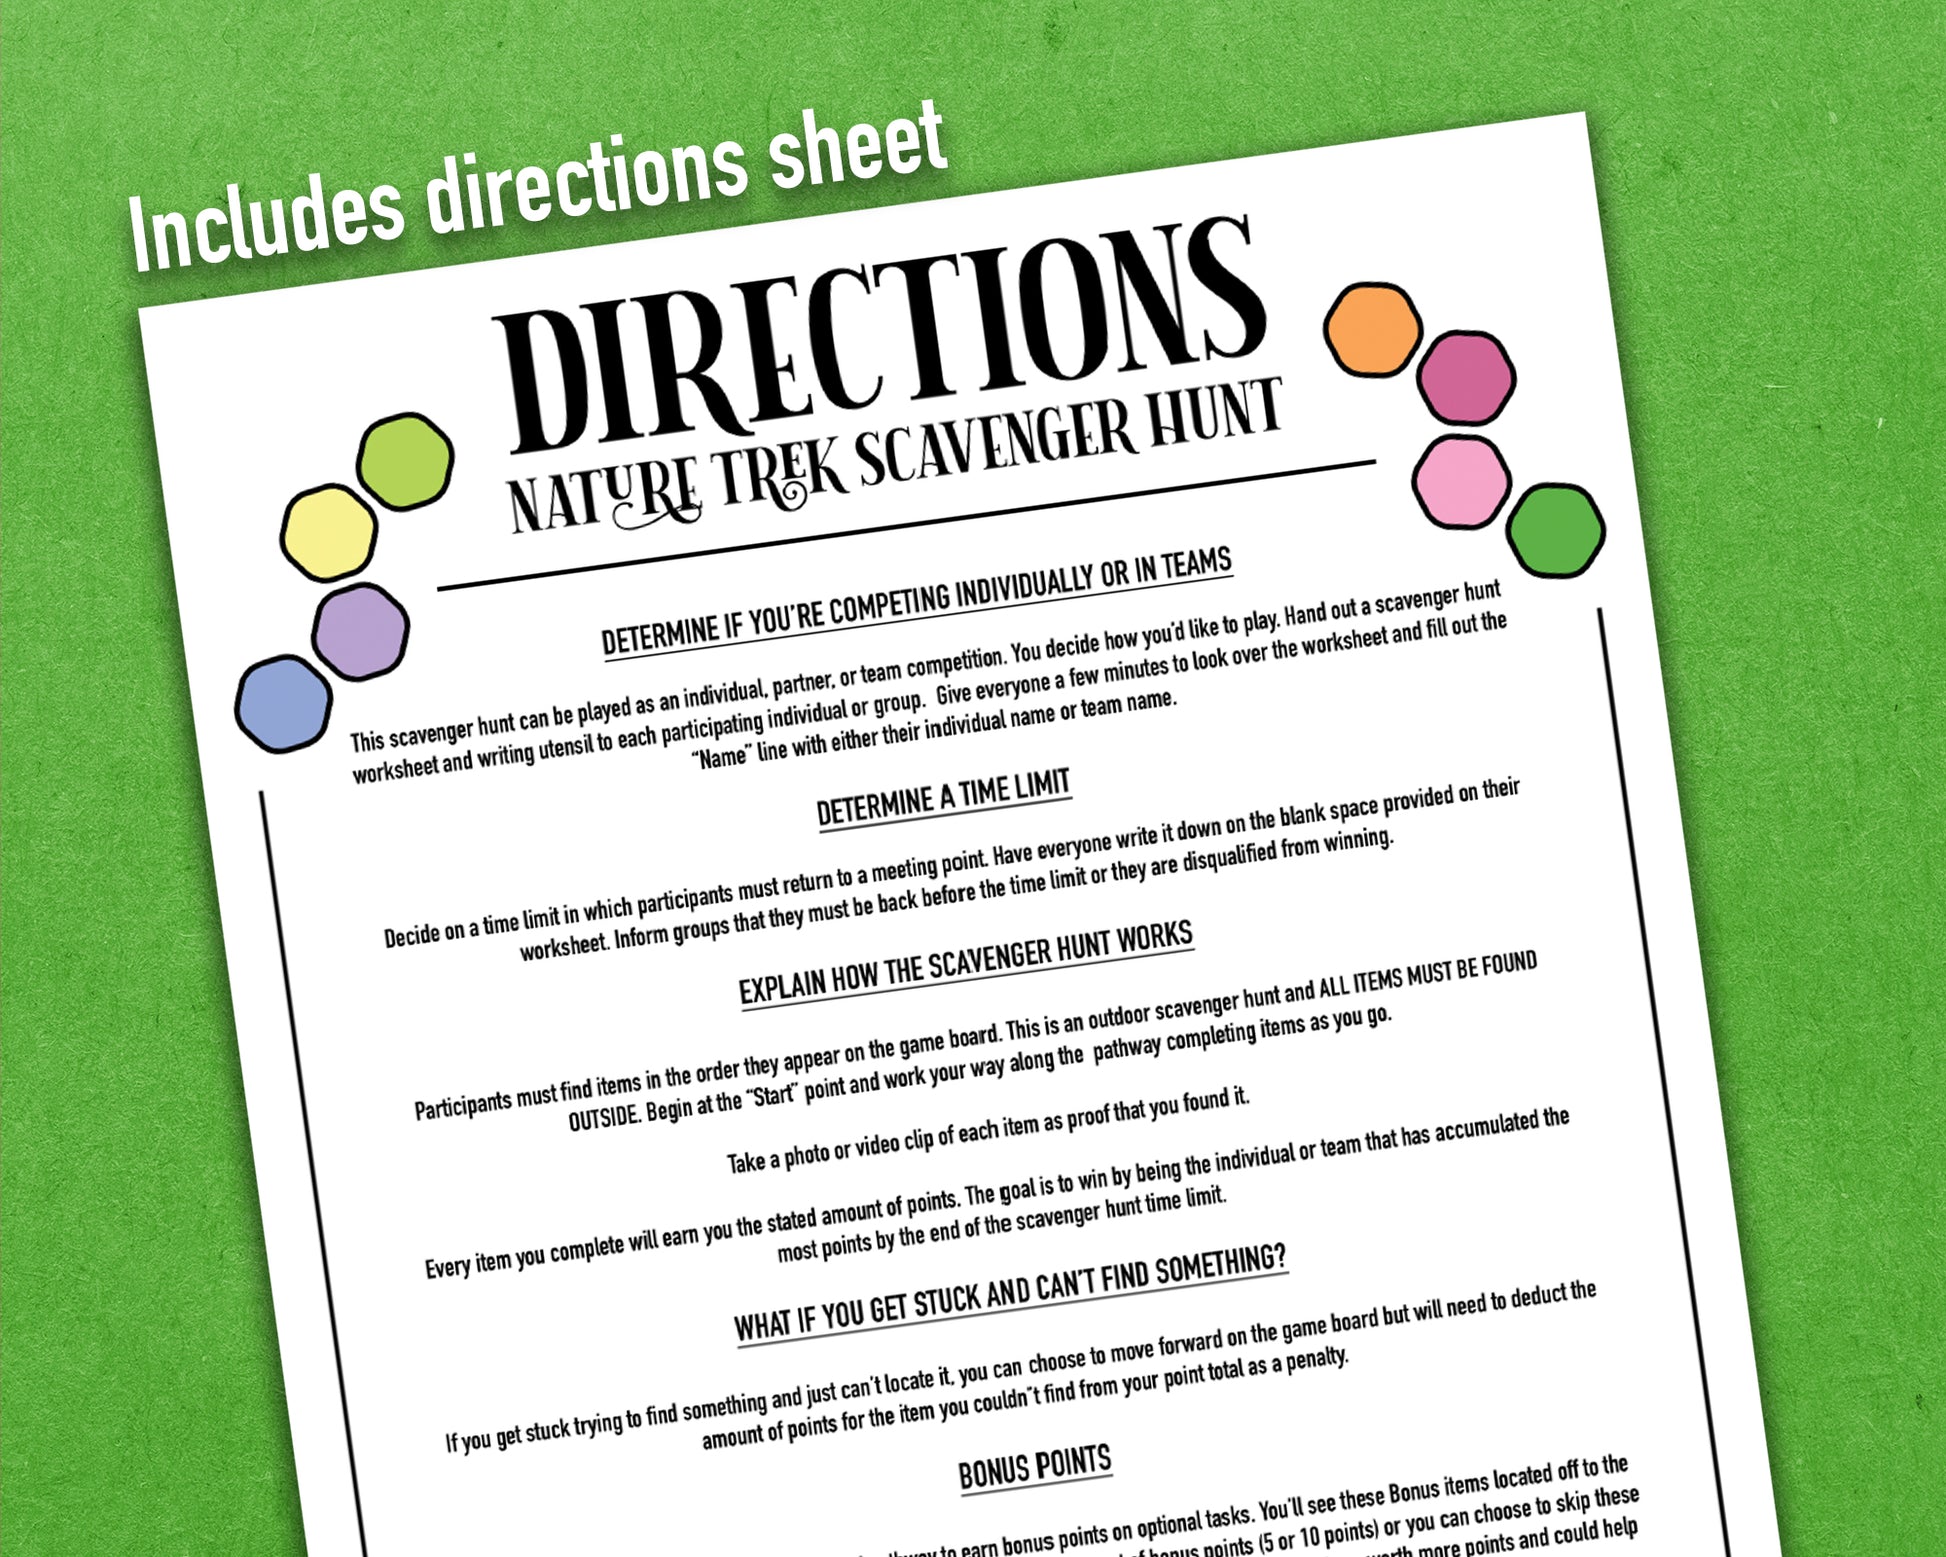 A bundle of four printable nature trek outdoor scavenger hunts for spring, summer, fall, and winter. A competitive team building activity where each spot on the worksheet has an item you need to find to earn points.